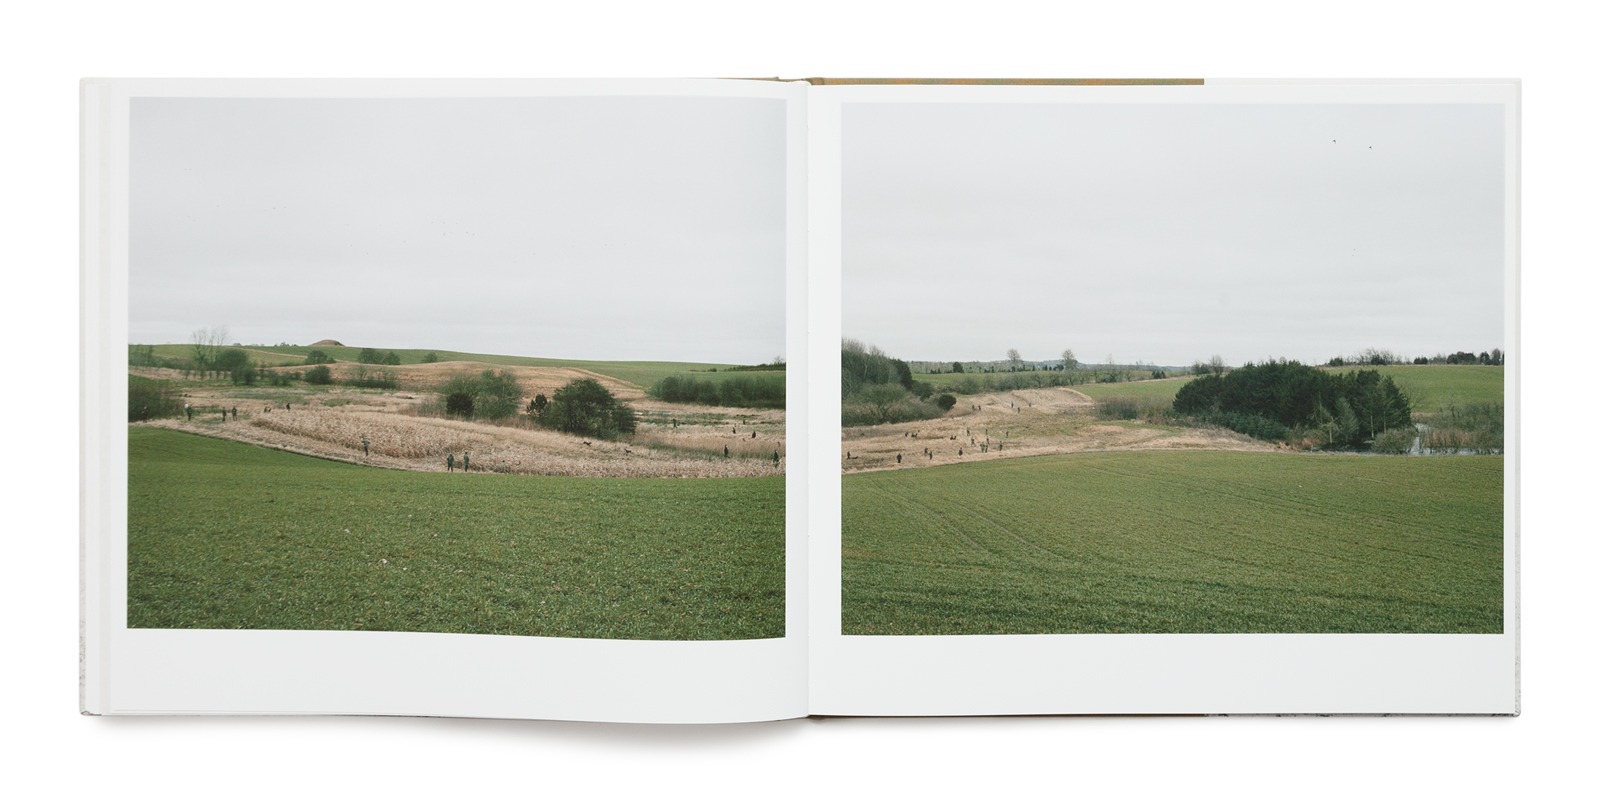 Spread from the book How To Hunt by Trine Søndergaard and Nicolai Howalt